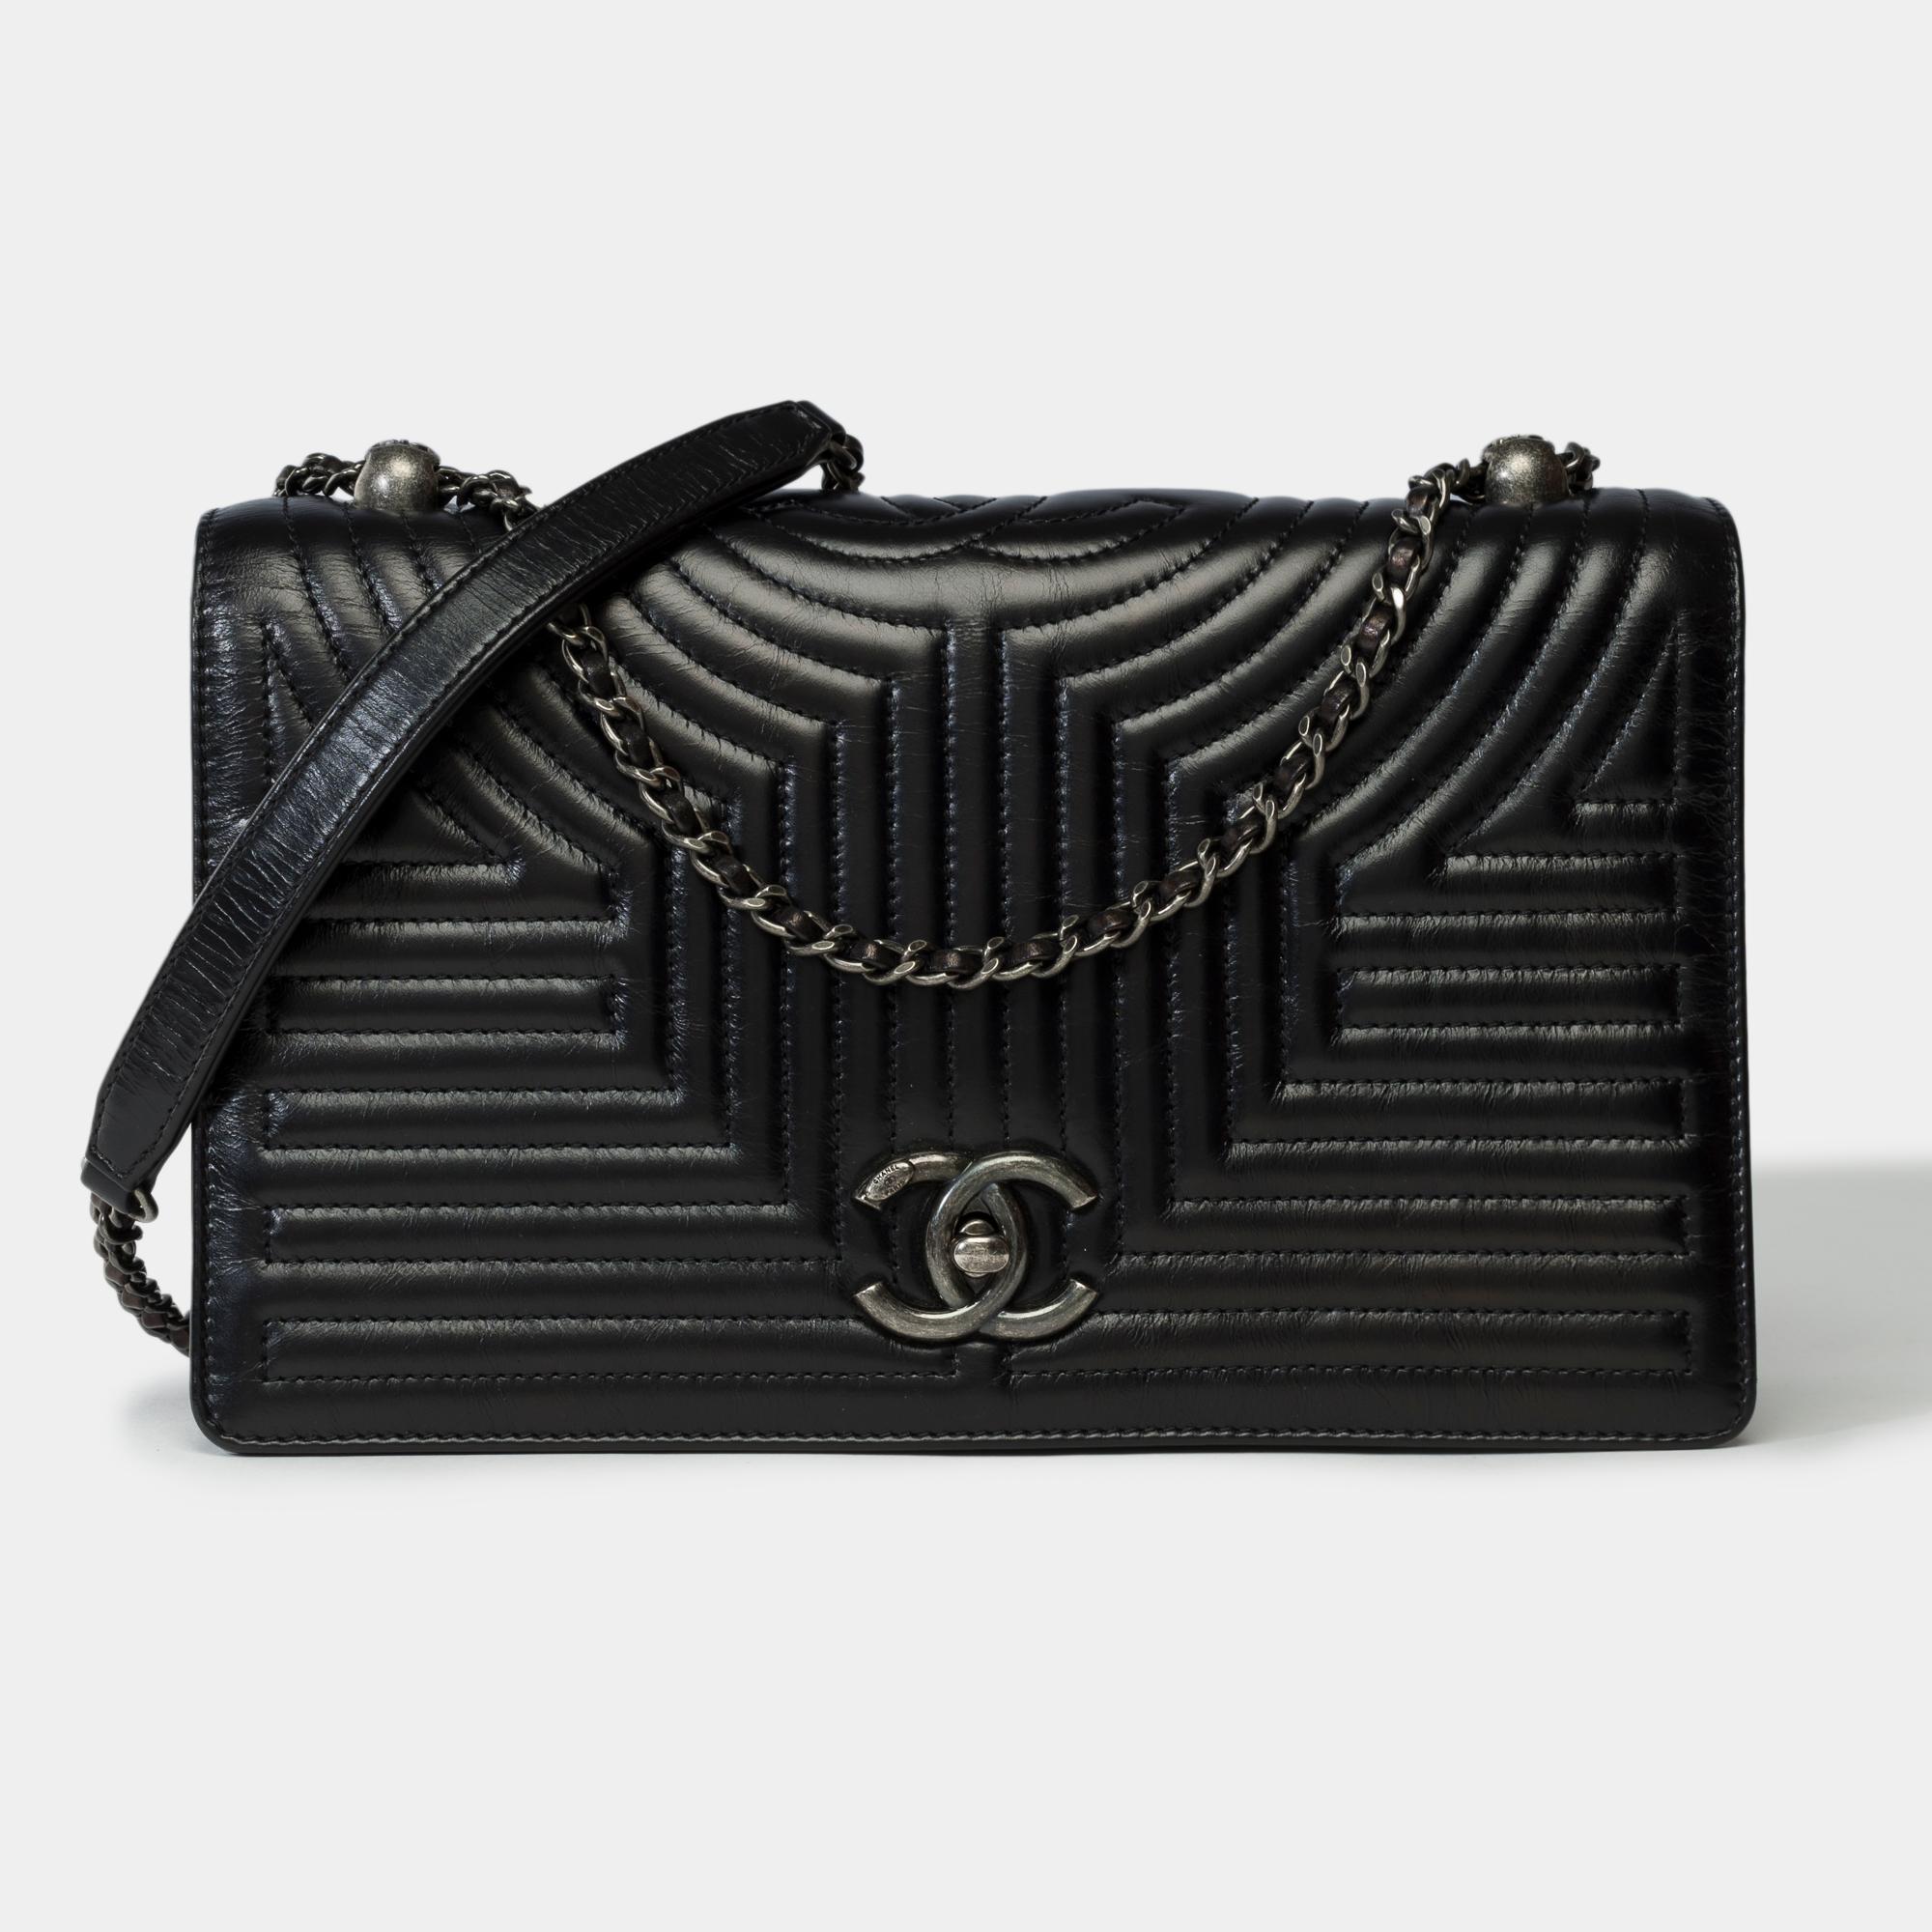 Chanel Coco shoulder flap bag in black quilted leather, antique silver metal trim, an adjustable chain handle in silver metal allowing a shoulder or crossbody carry

A logo closure in aged silver metal on flap
Grey canvas lining, one zippered